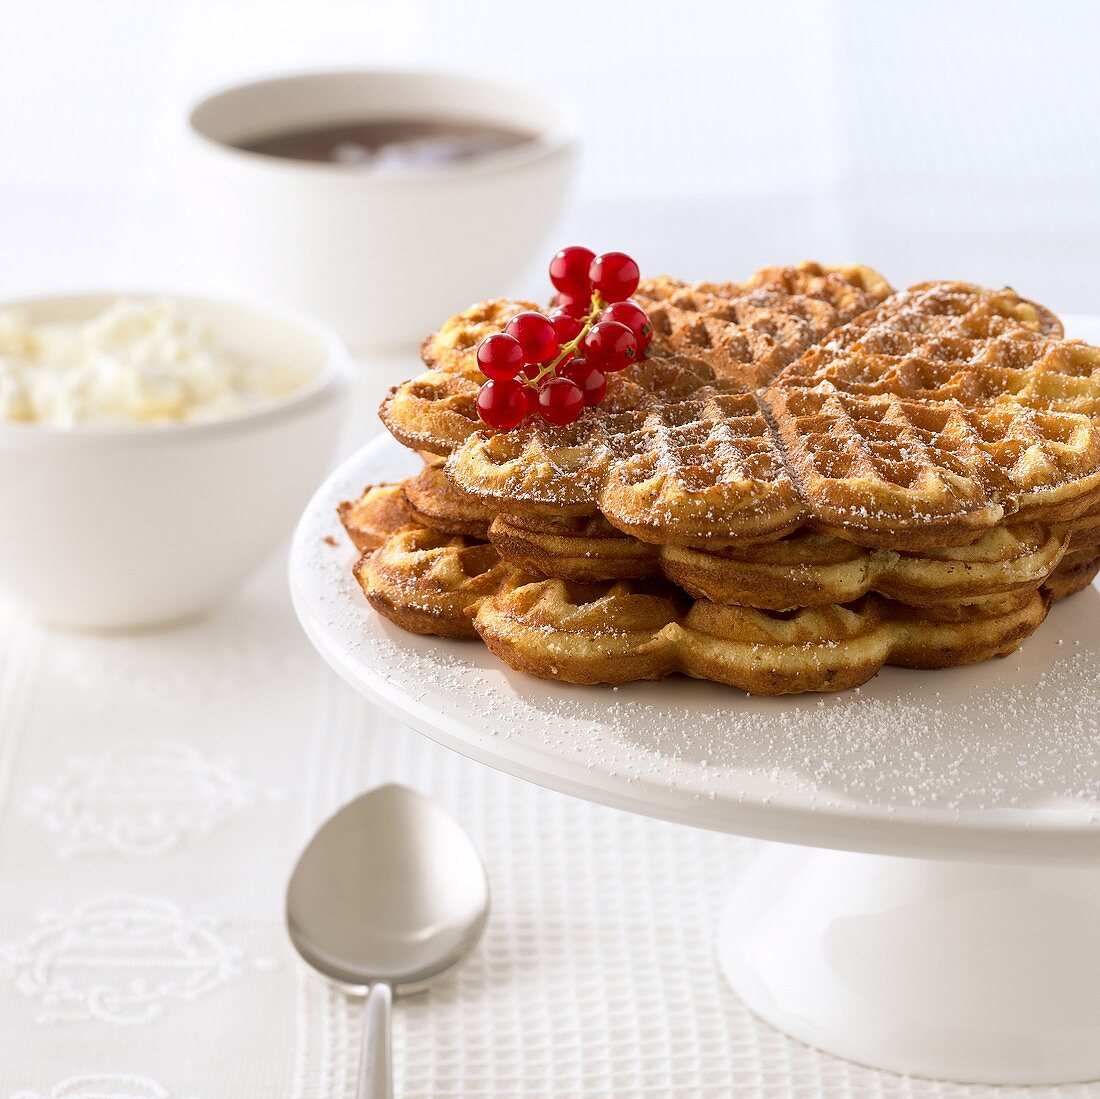 'Sand waffles', garnished with redcurrants